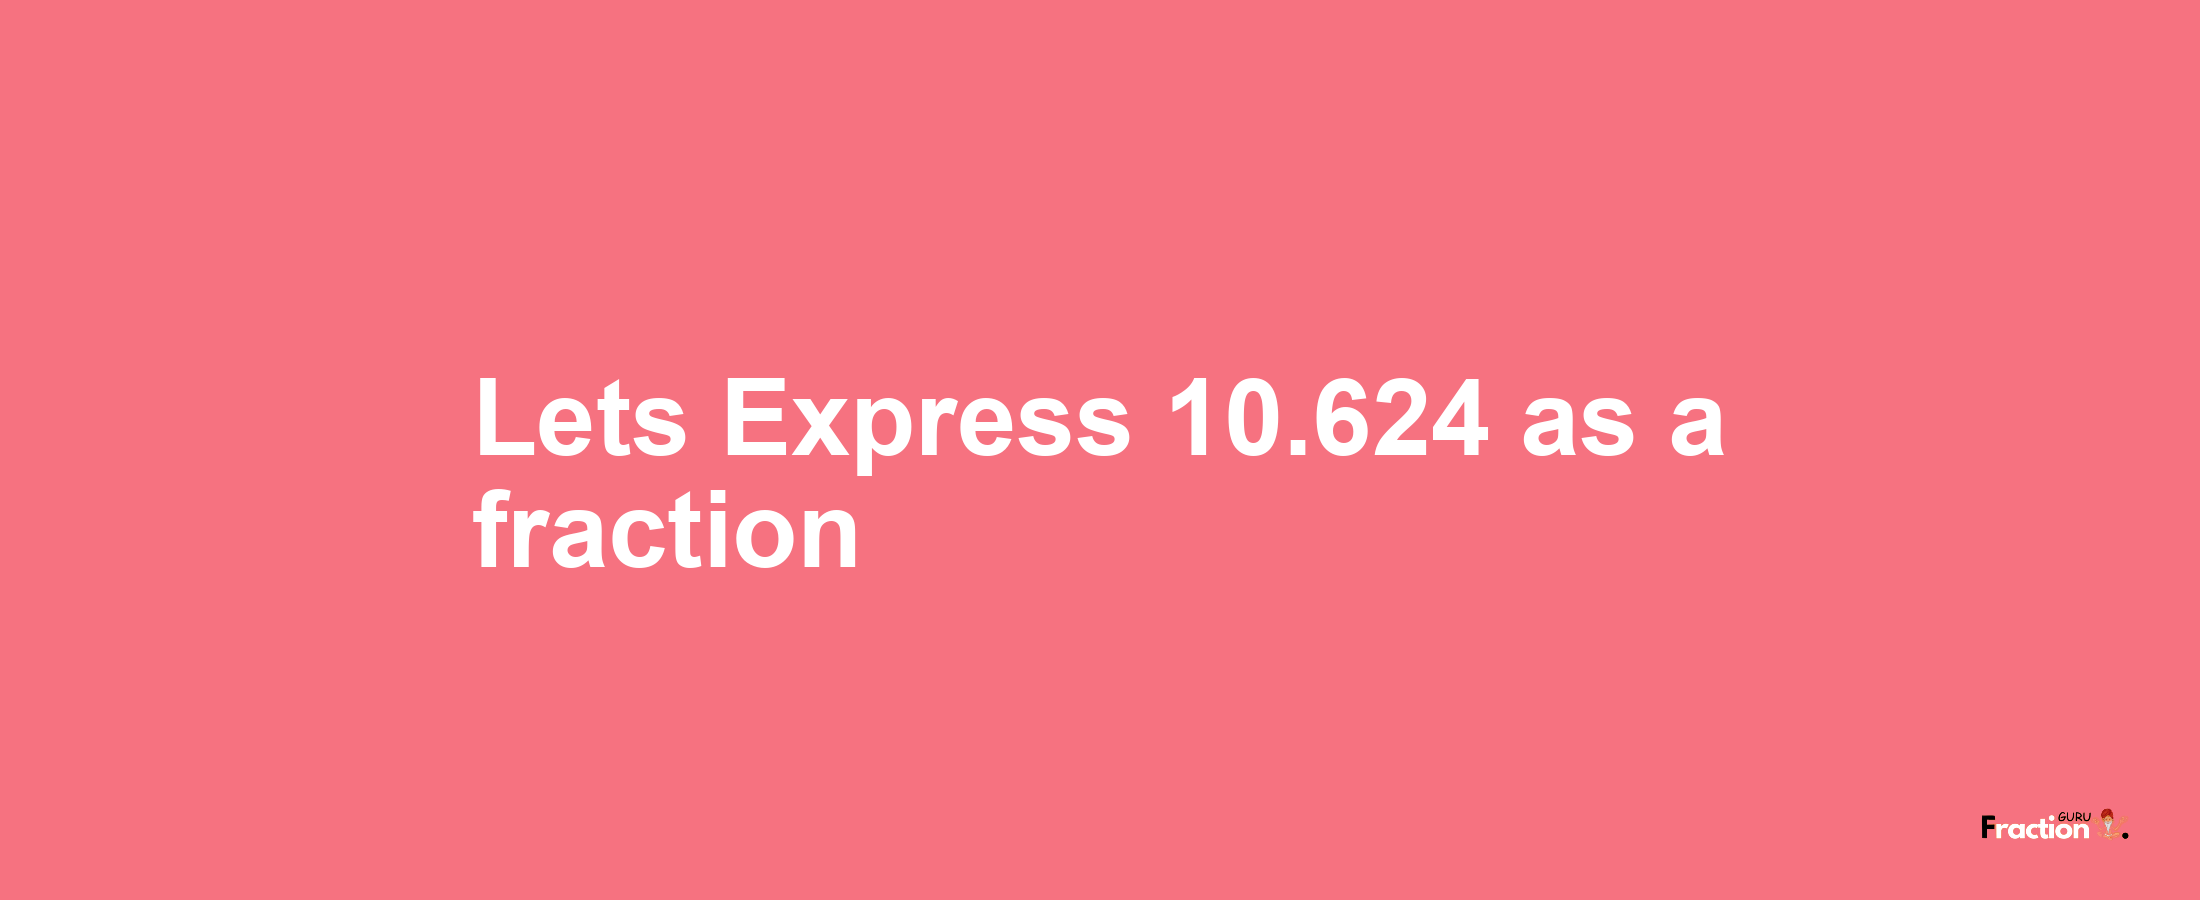 Lets Express 10.624 as afraction